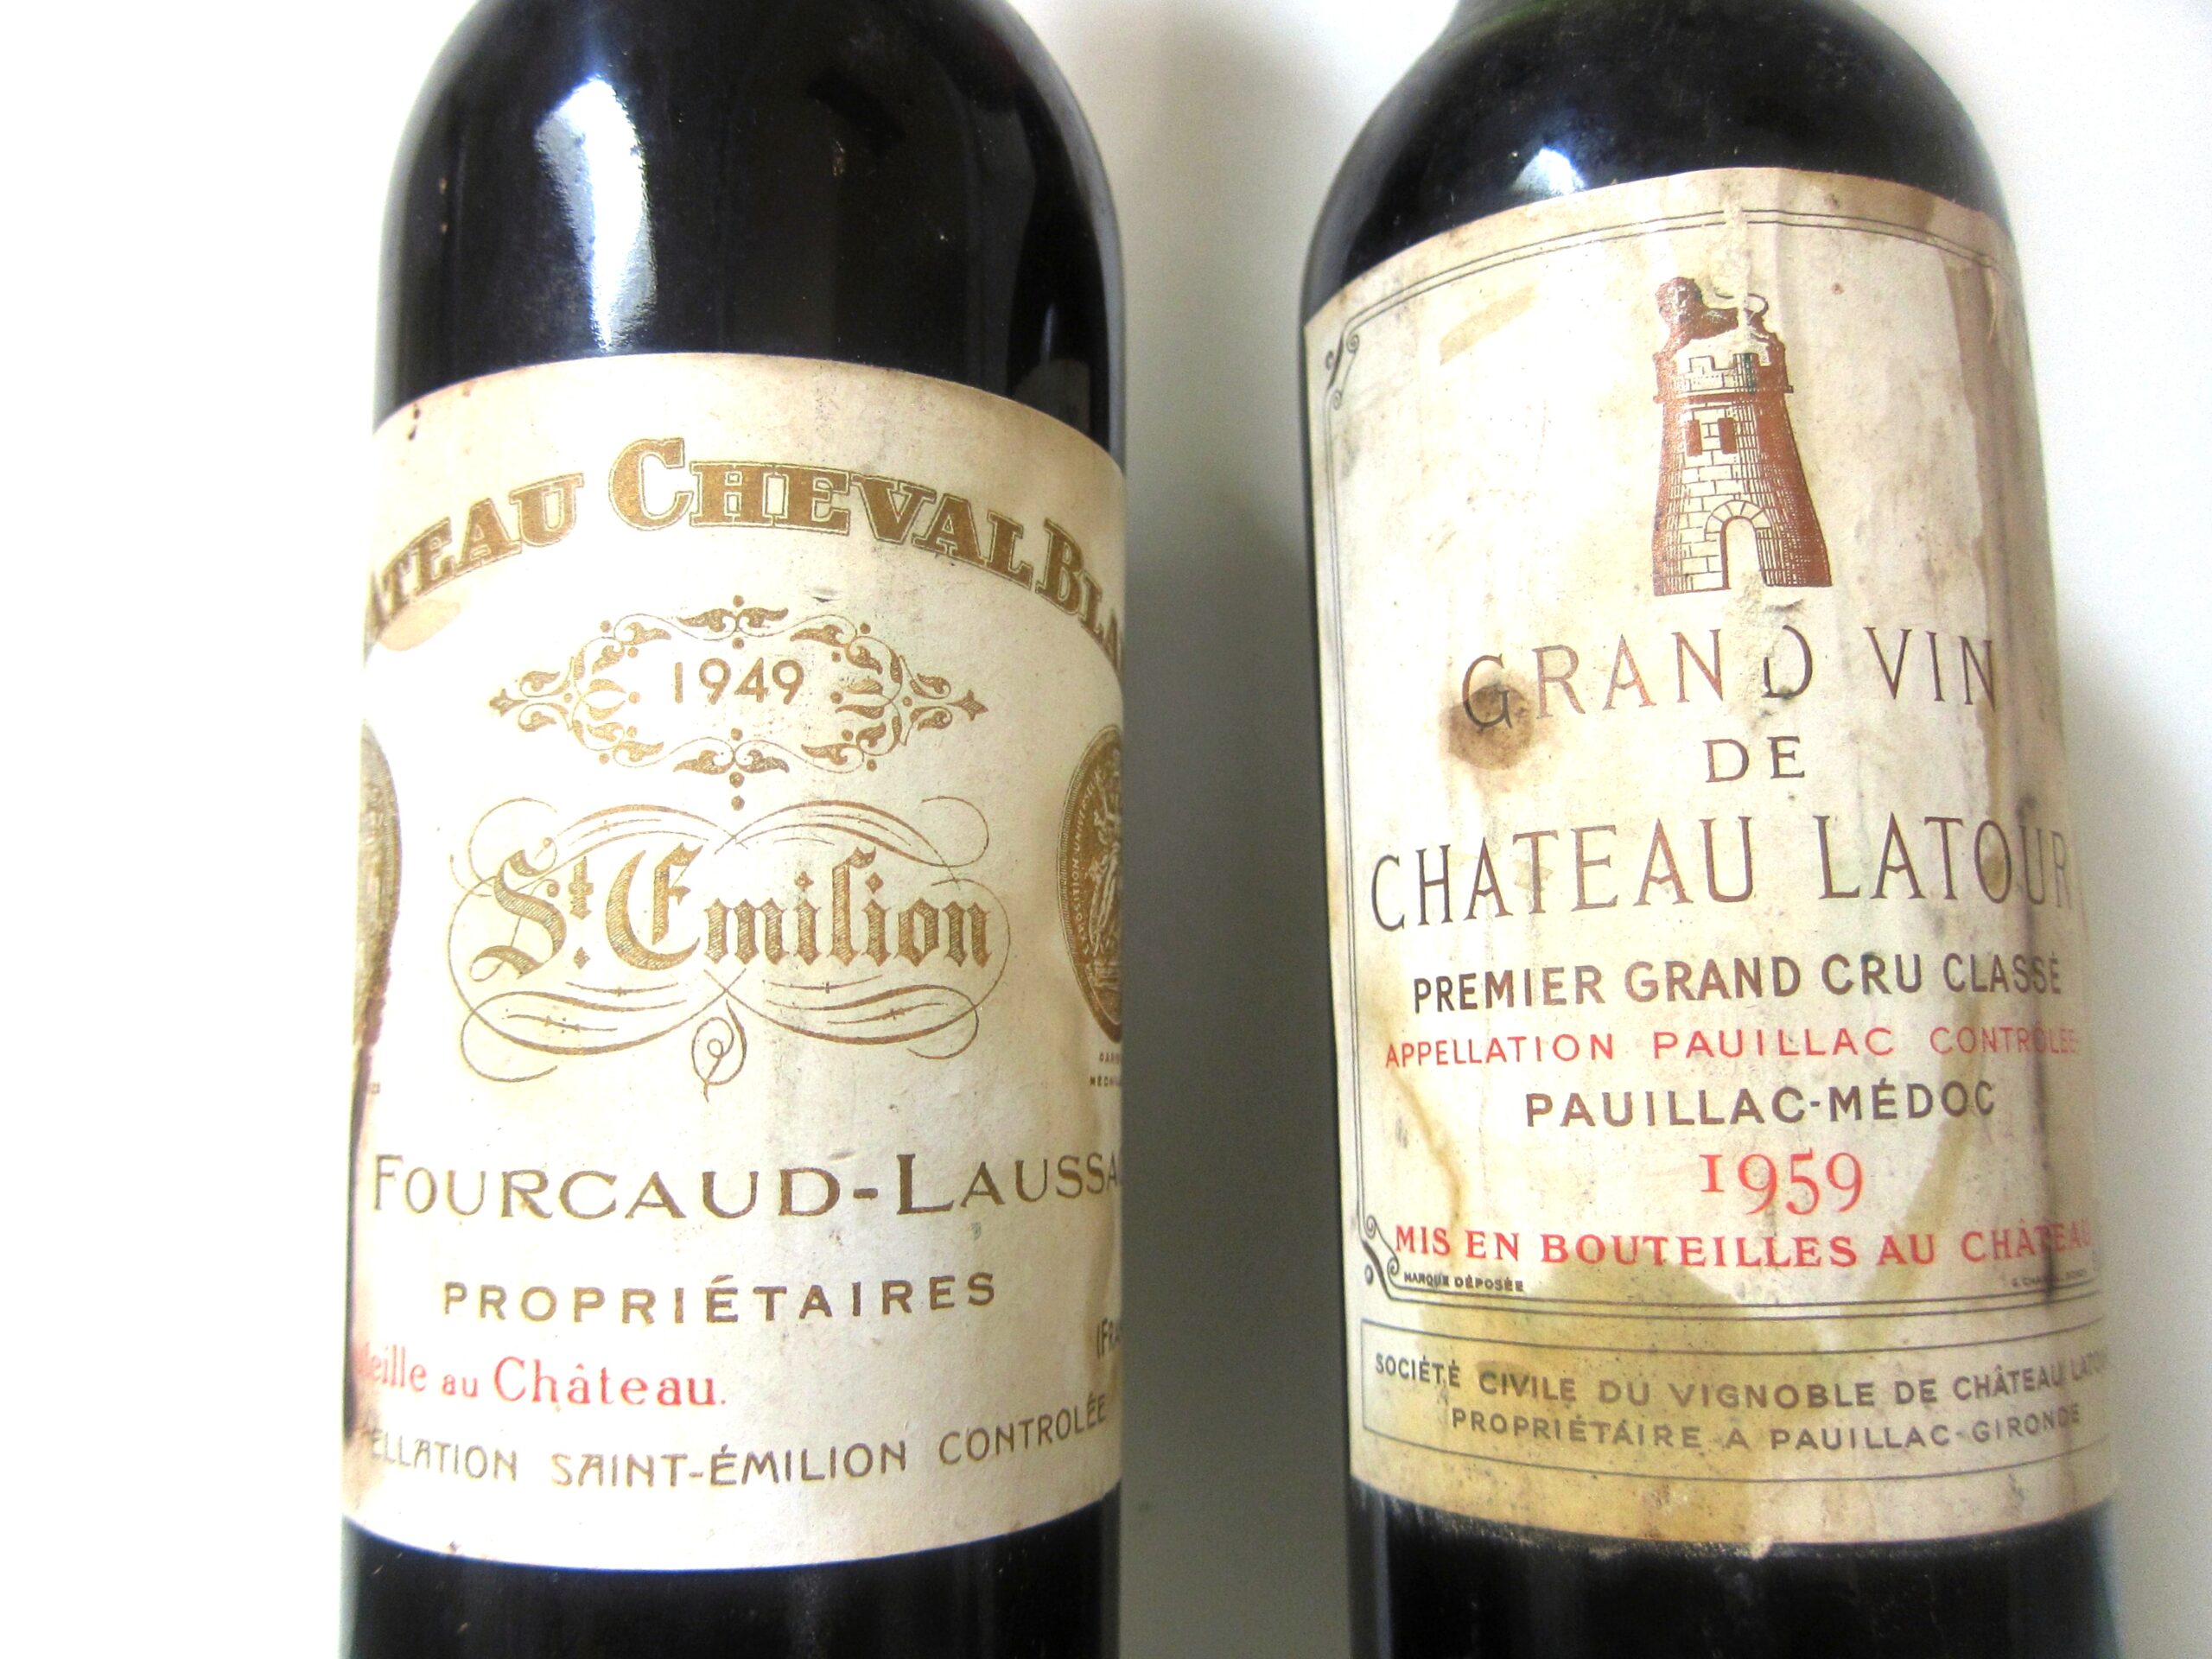 Chateau Cheval Blanc 1949, Buy Online